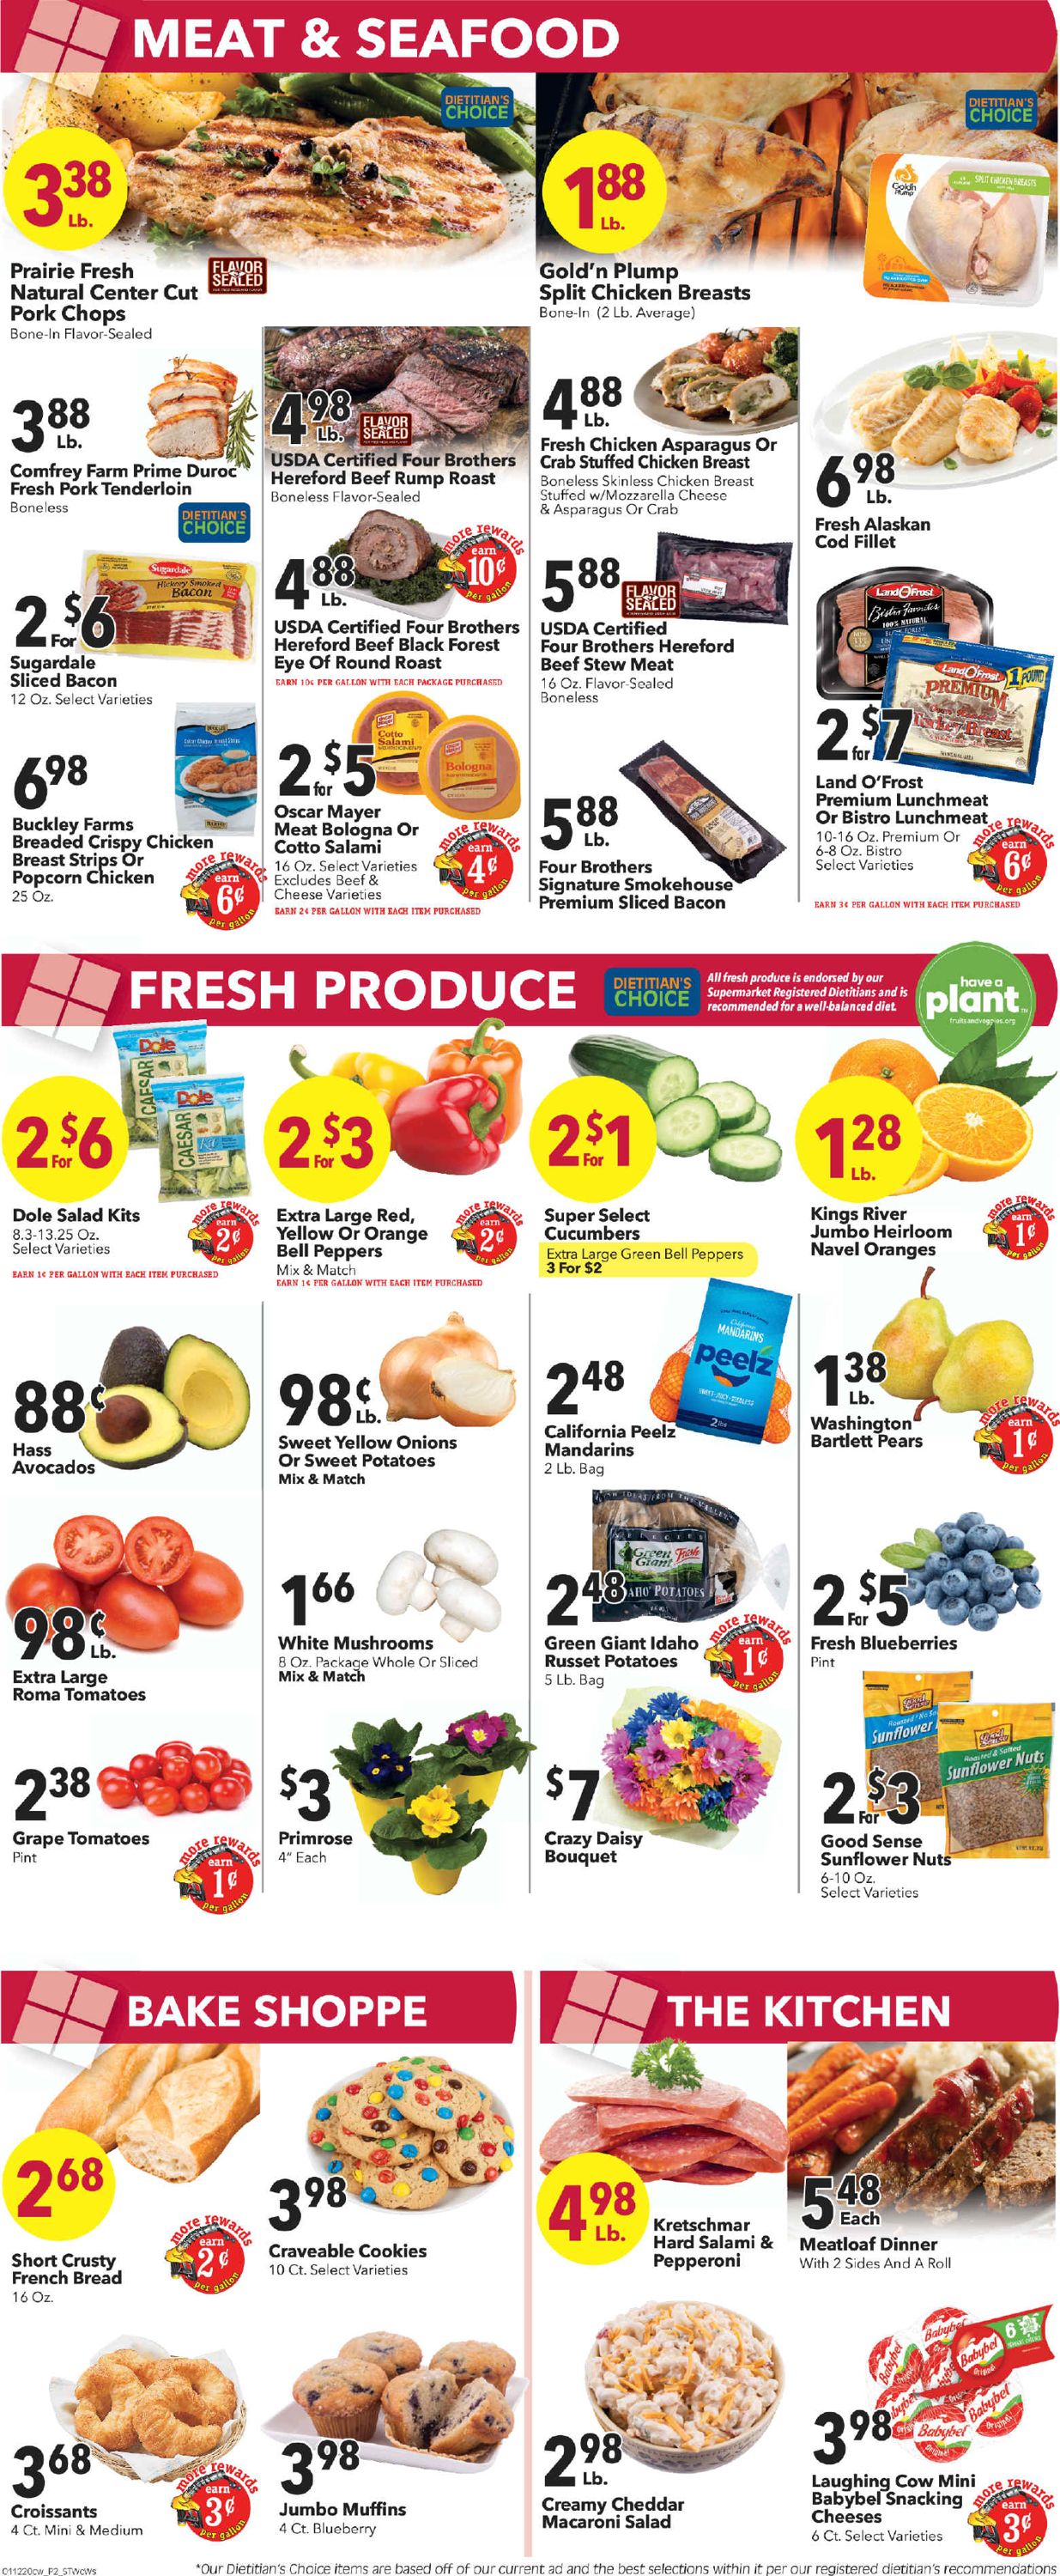 Cash Wise Weekly Ad Circular - valid 01/15-01/21/2020 (Page 2)